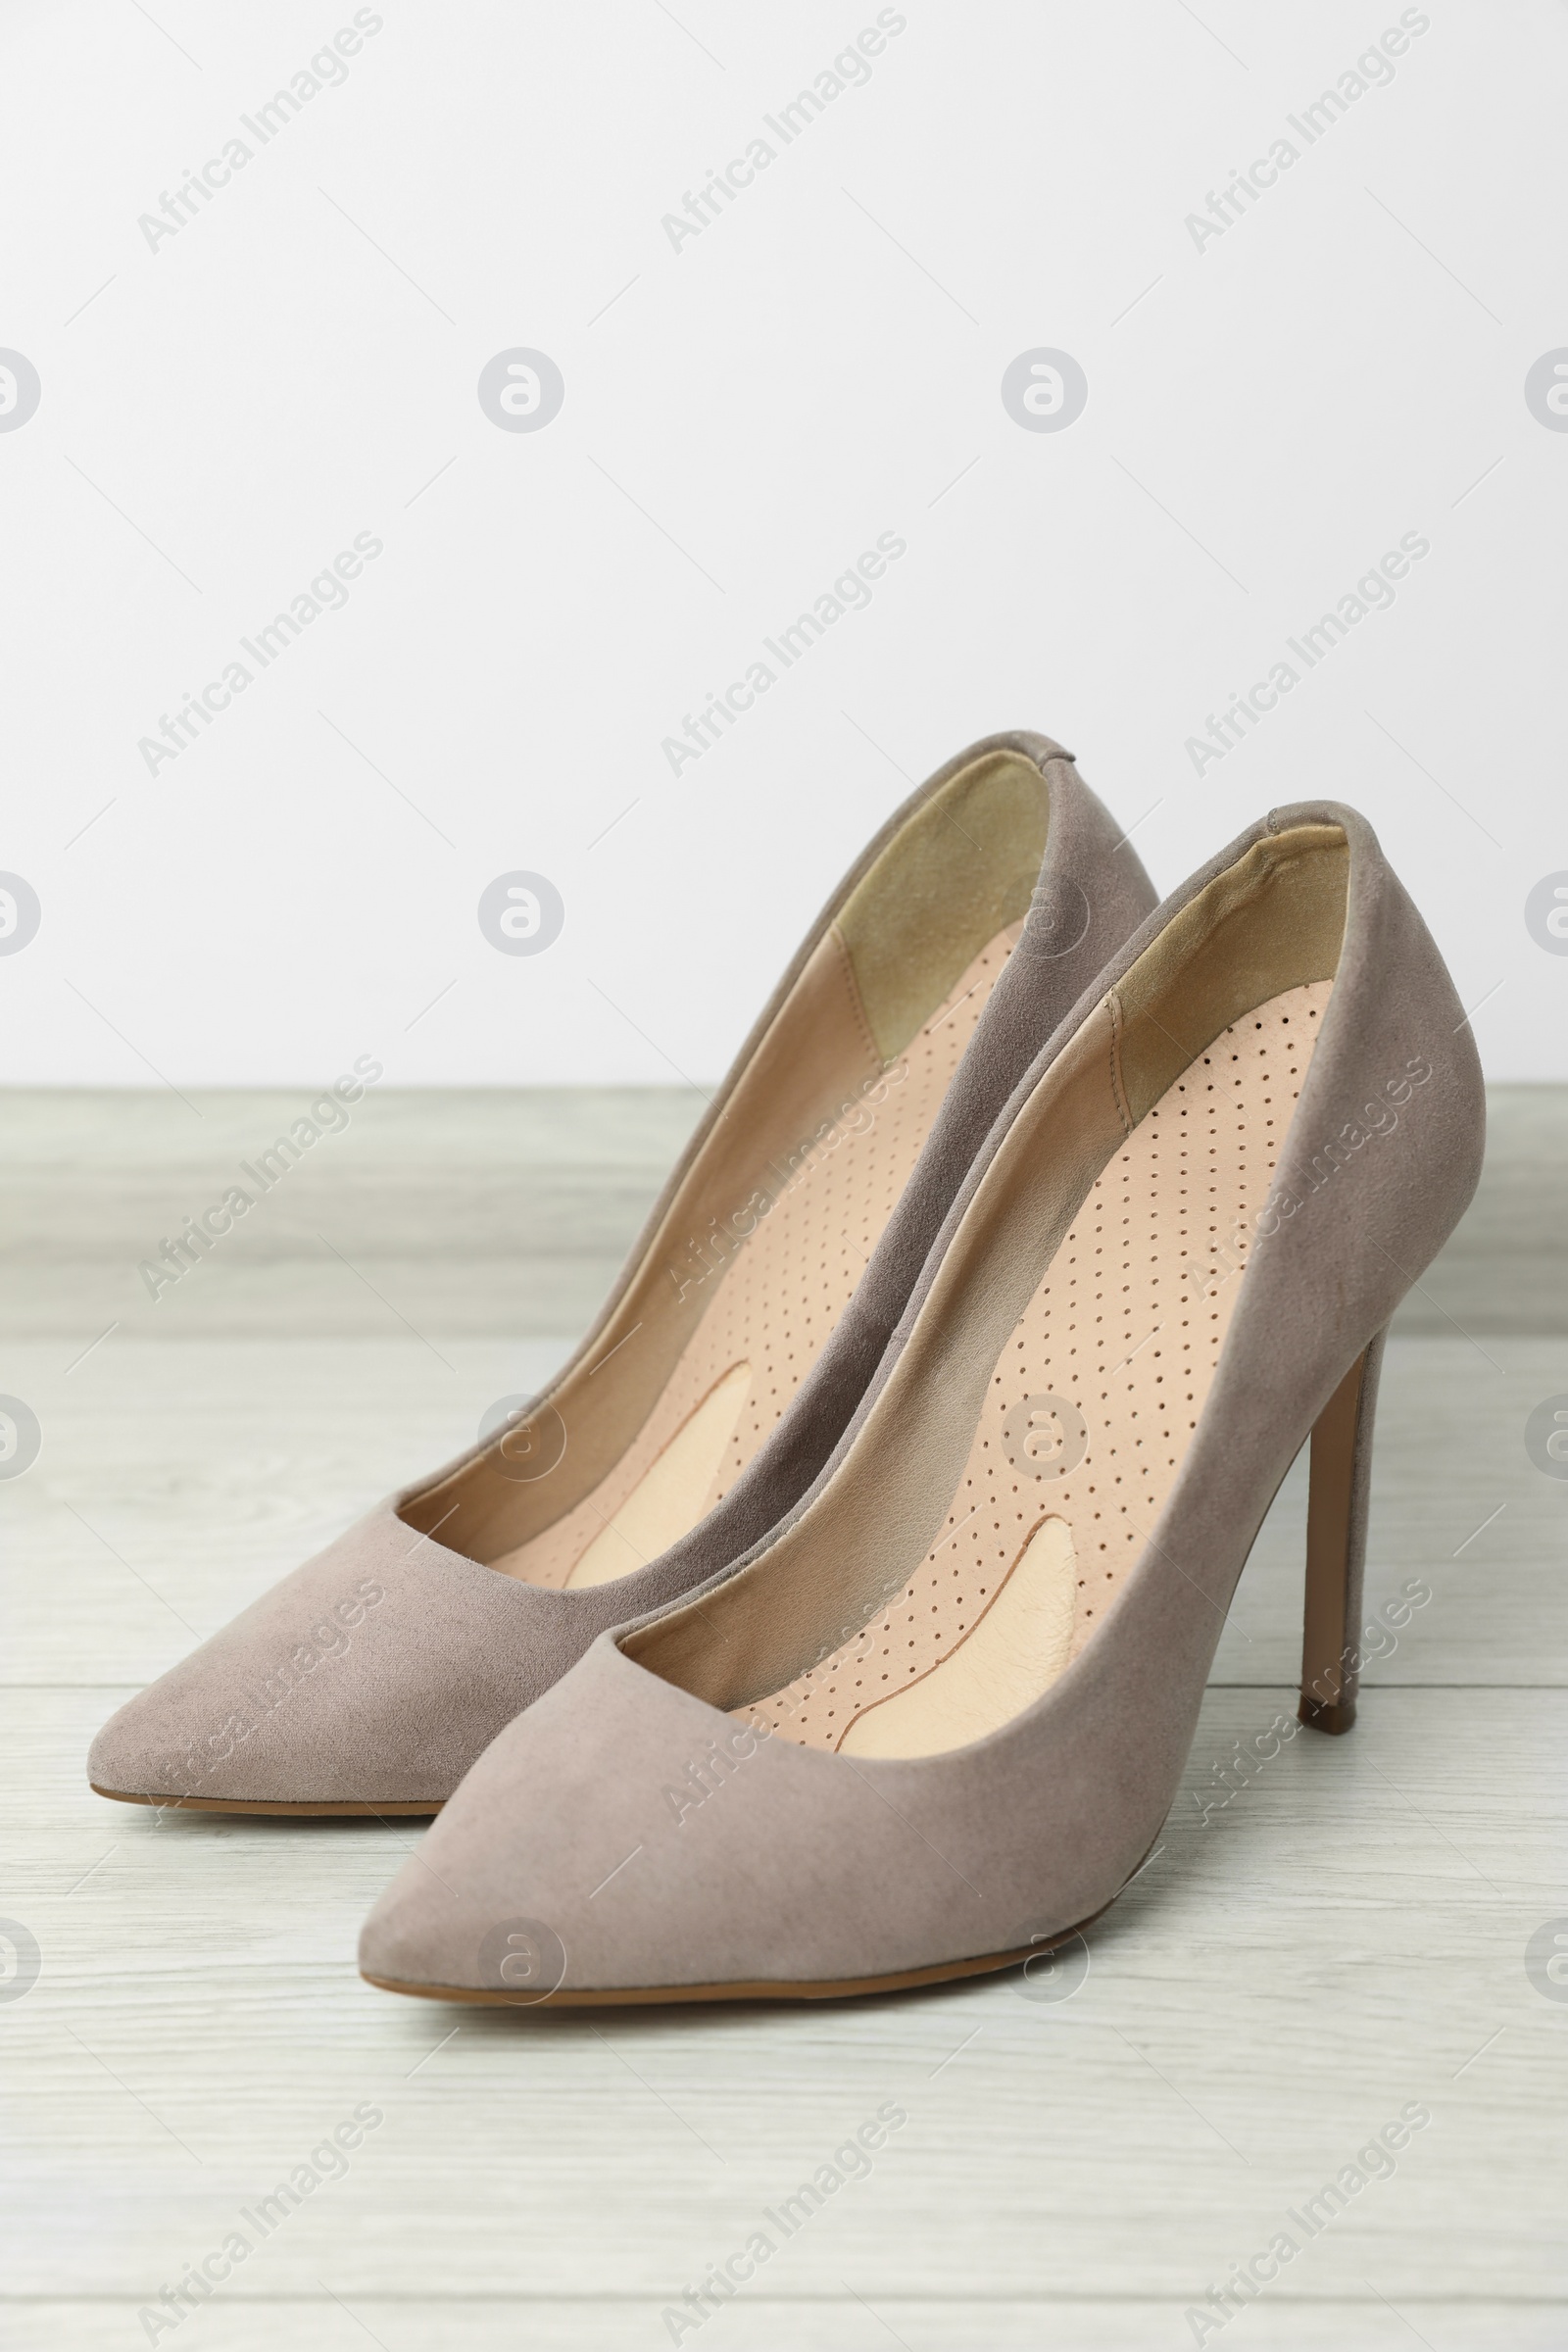 Photo of Orthopedic insoles in high heel shoes on floor